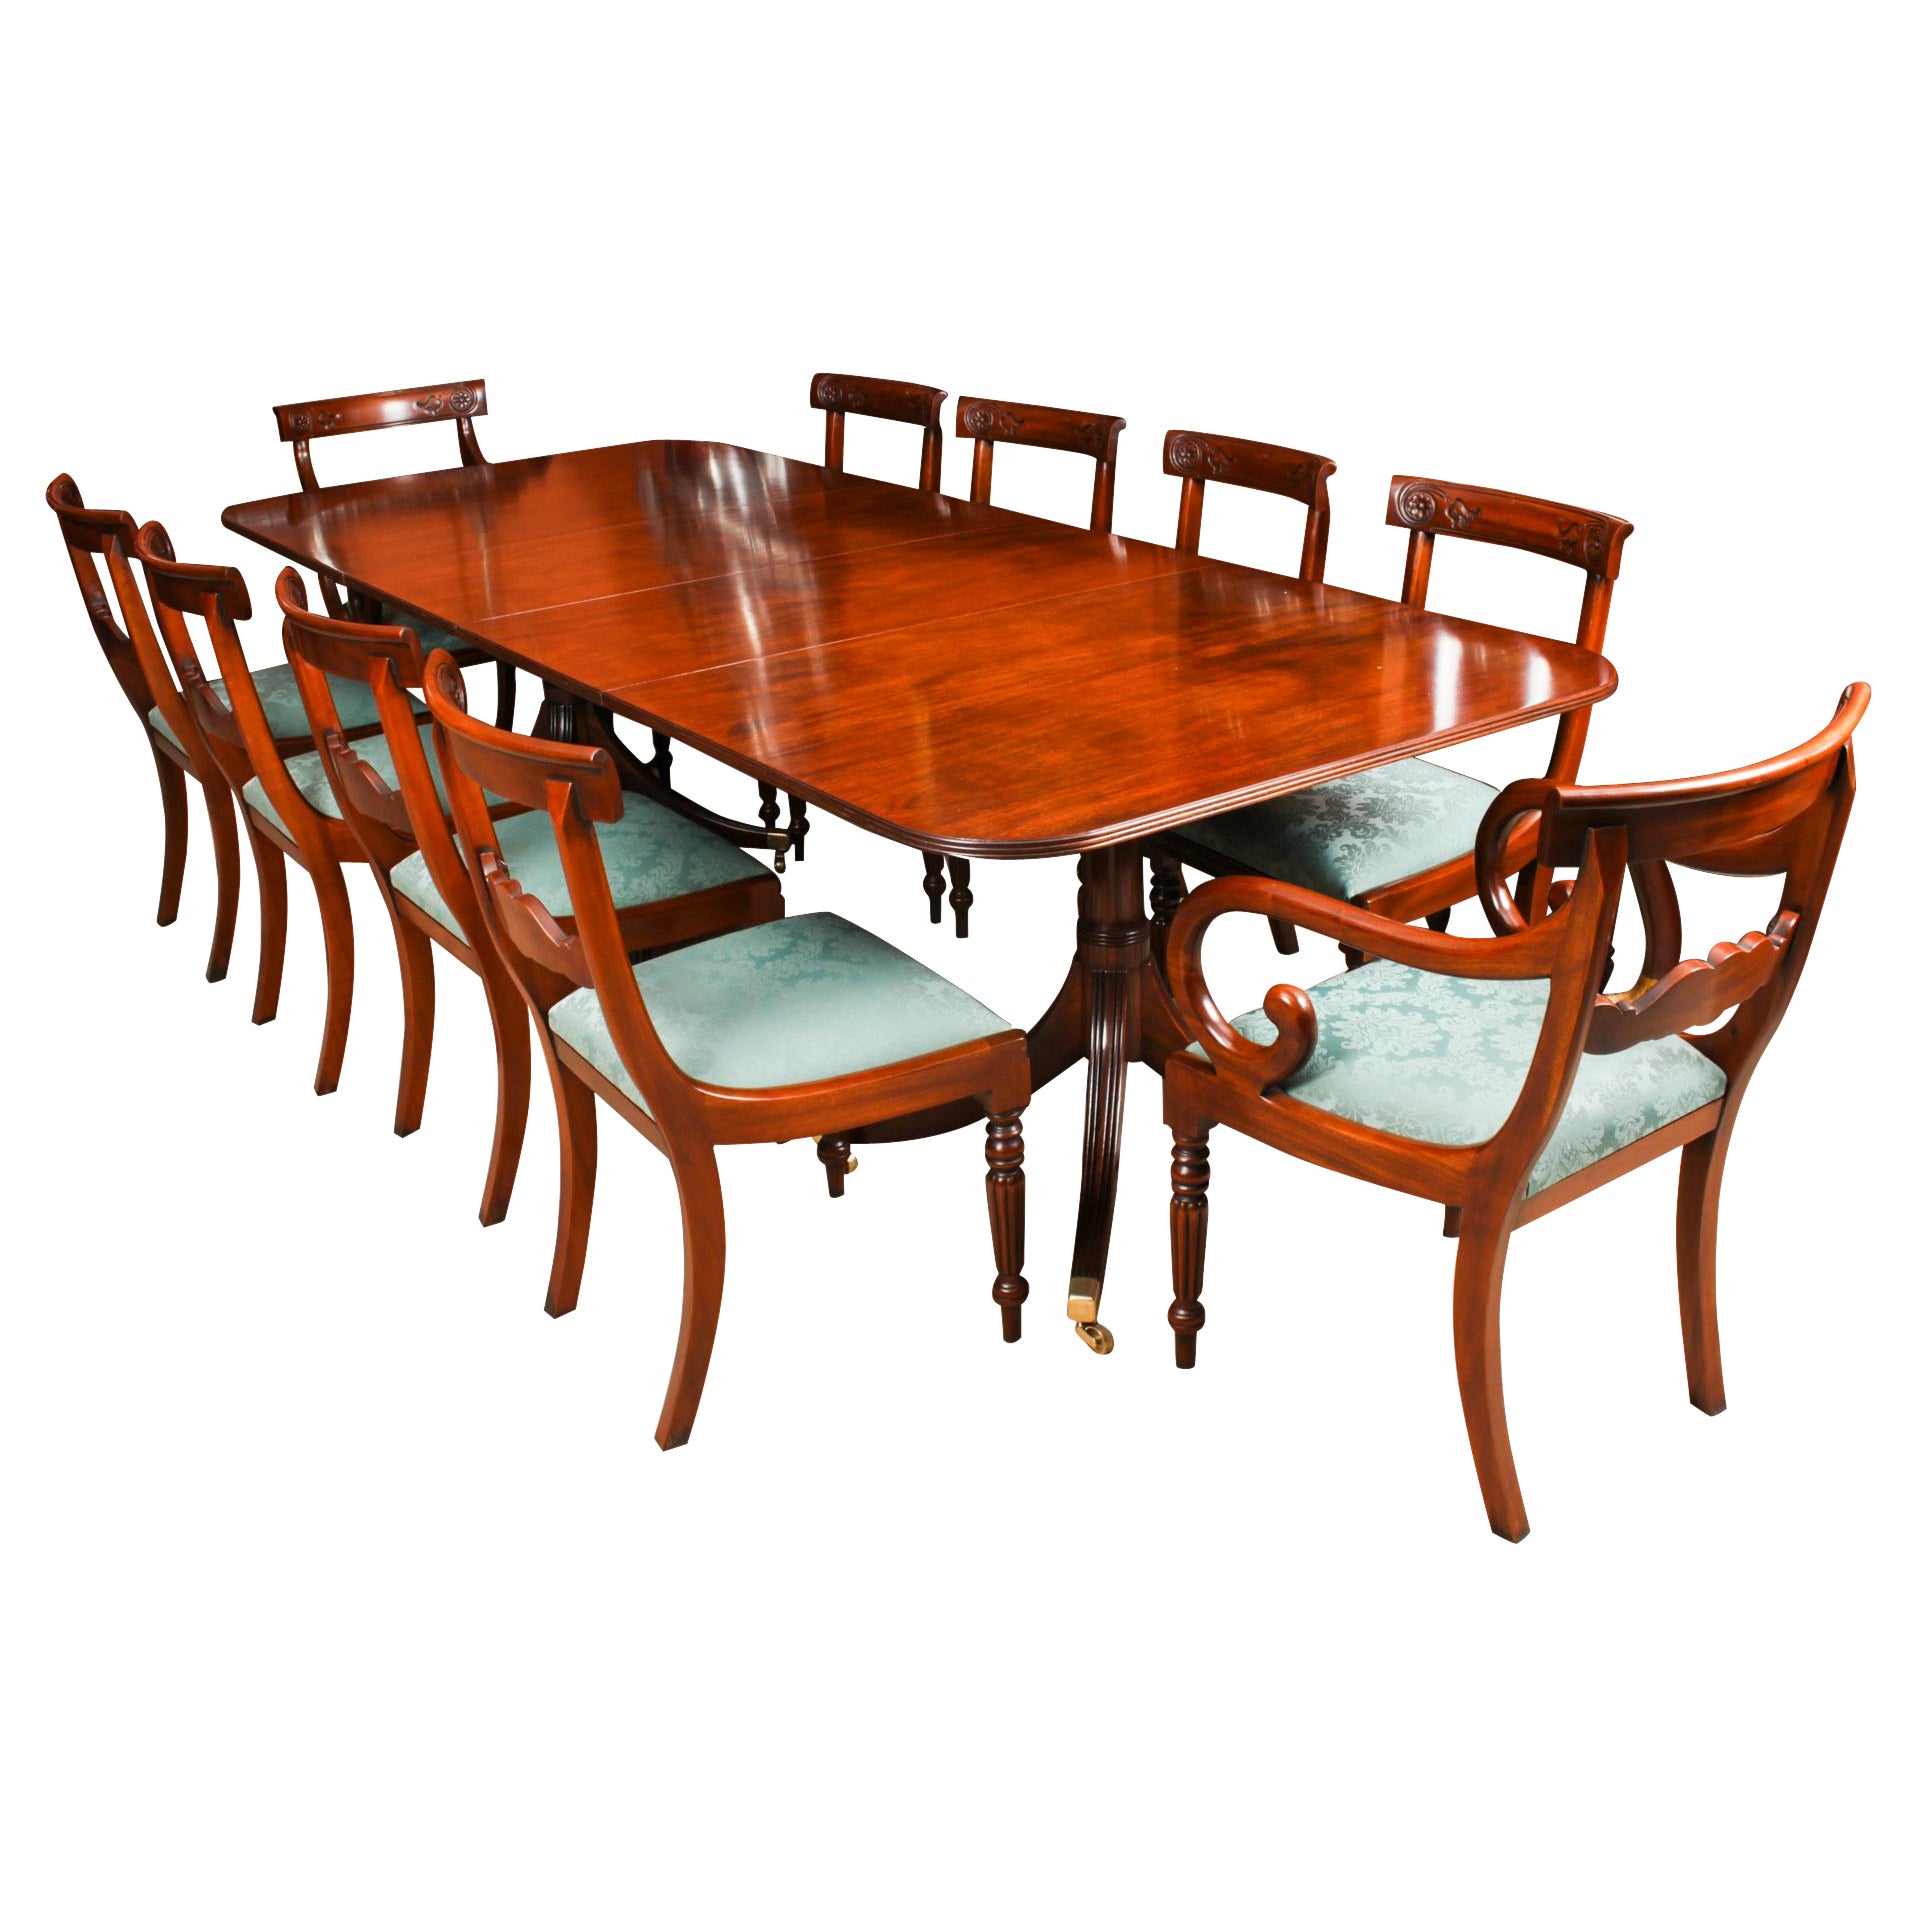 Vintage 3 Pillar Dining Table by William Tillman & 10 Dining Chairs 20th C